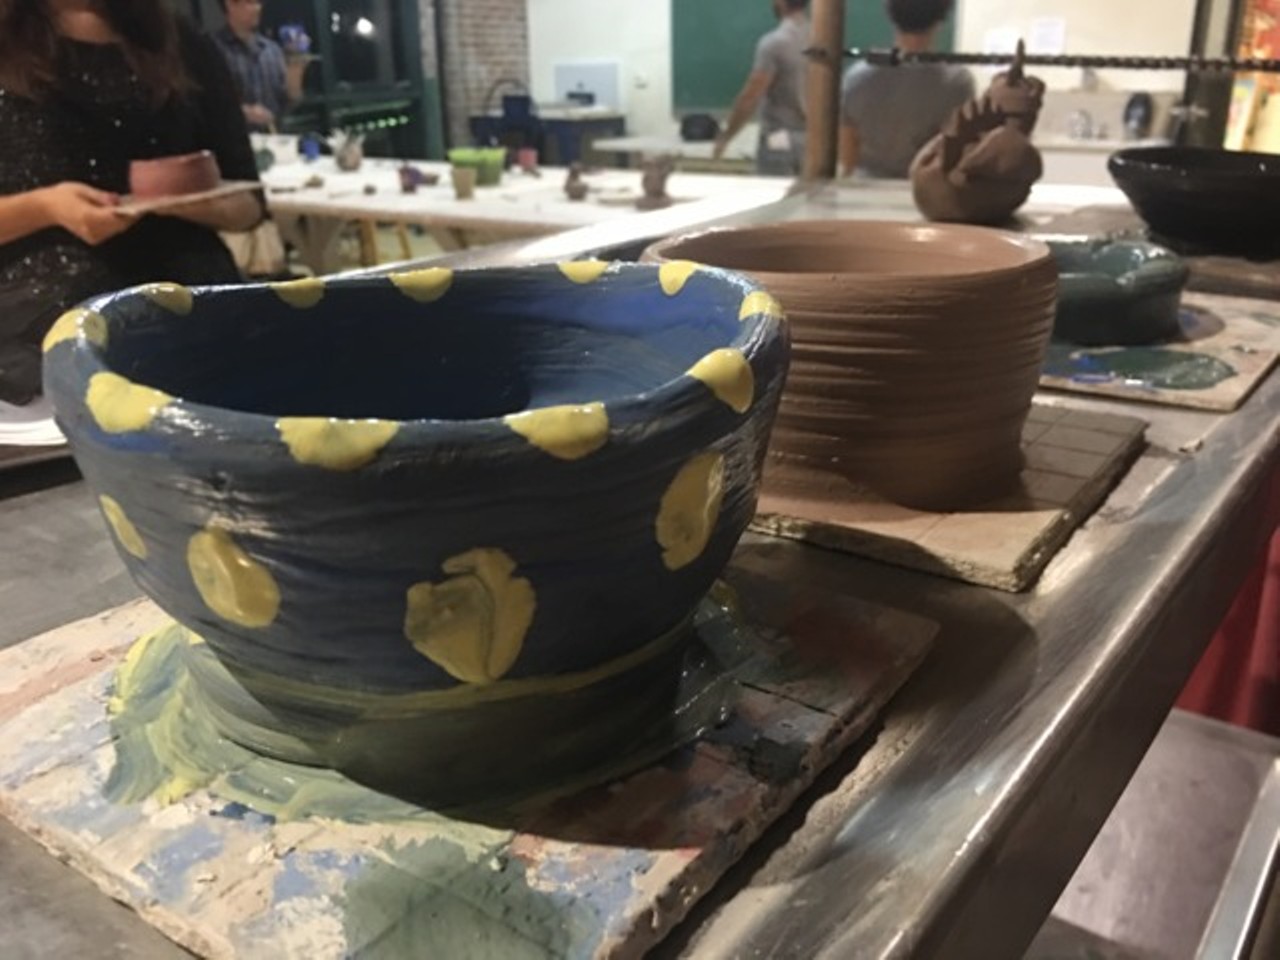 Friday Night Clay at the Morean Center for Clay in St. Petersburg
Feb. 8
Photo via Cathy Salustri